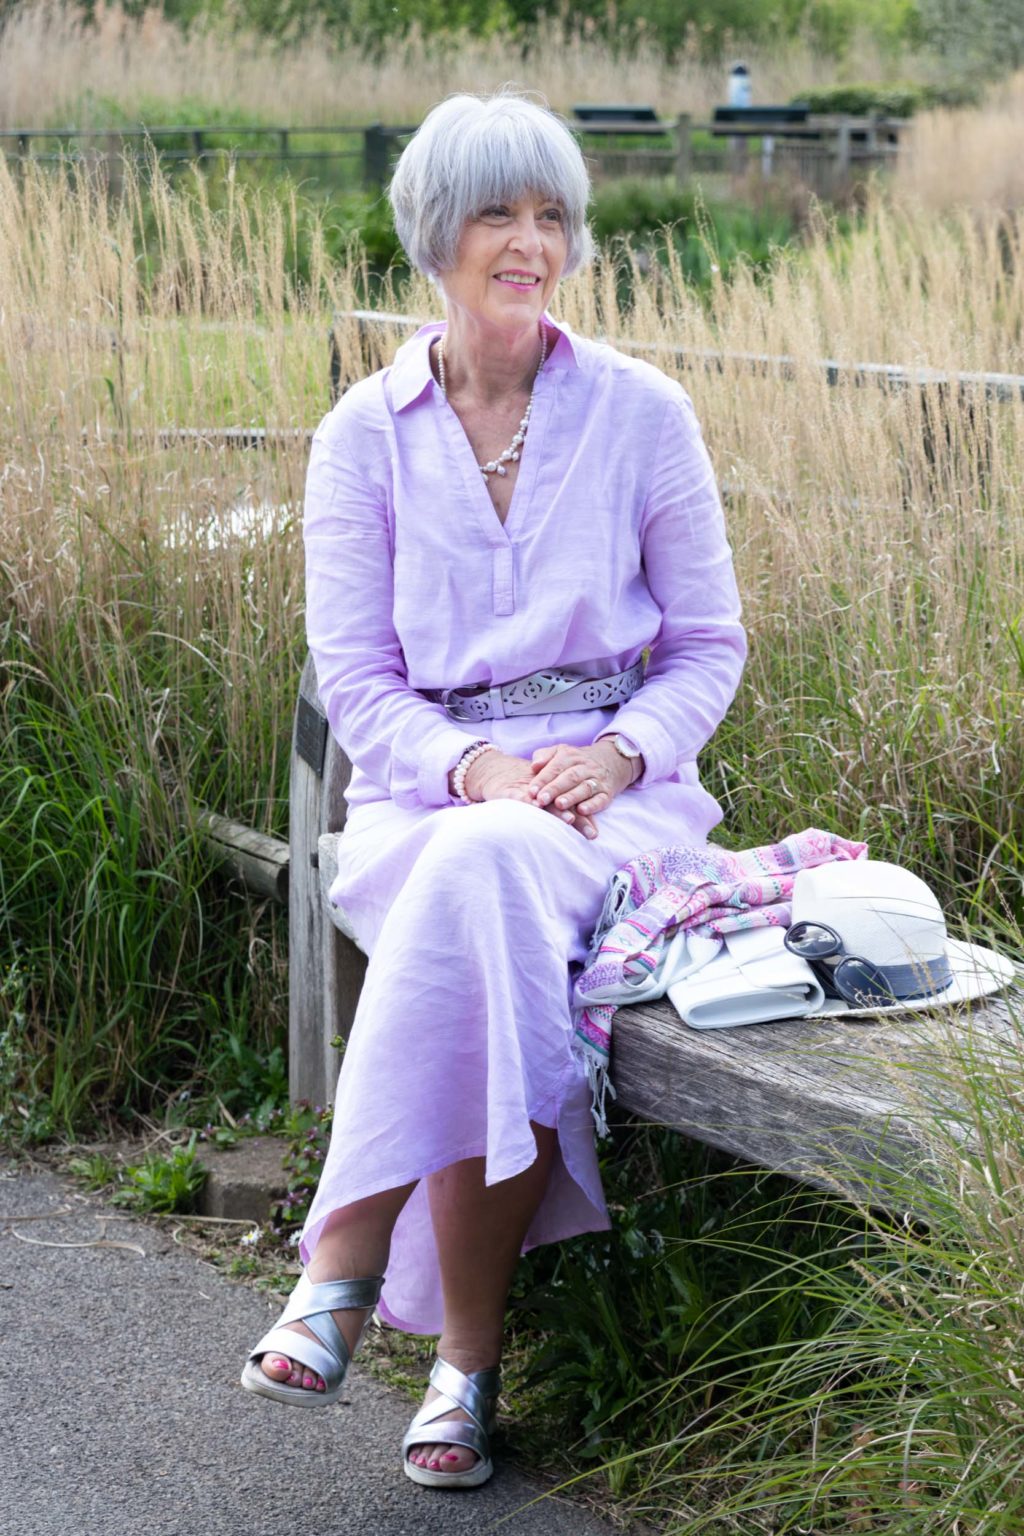 How to style a simple linen dress - Chic at any age